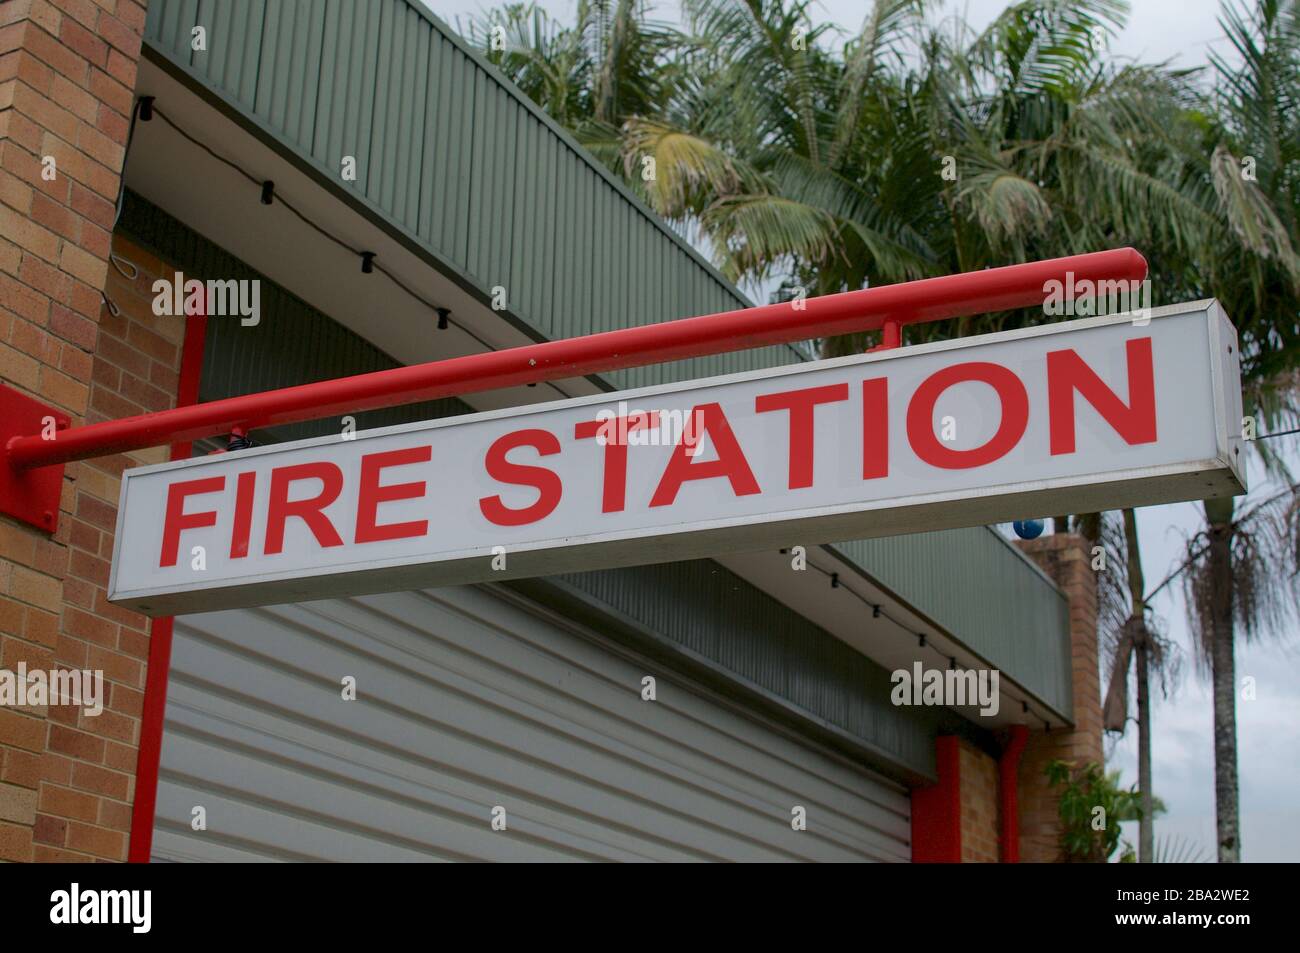 View of an Fire Station sign hanging in front of the statin in Bangalow, NSW, Australia Stock Photo